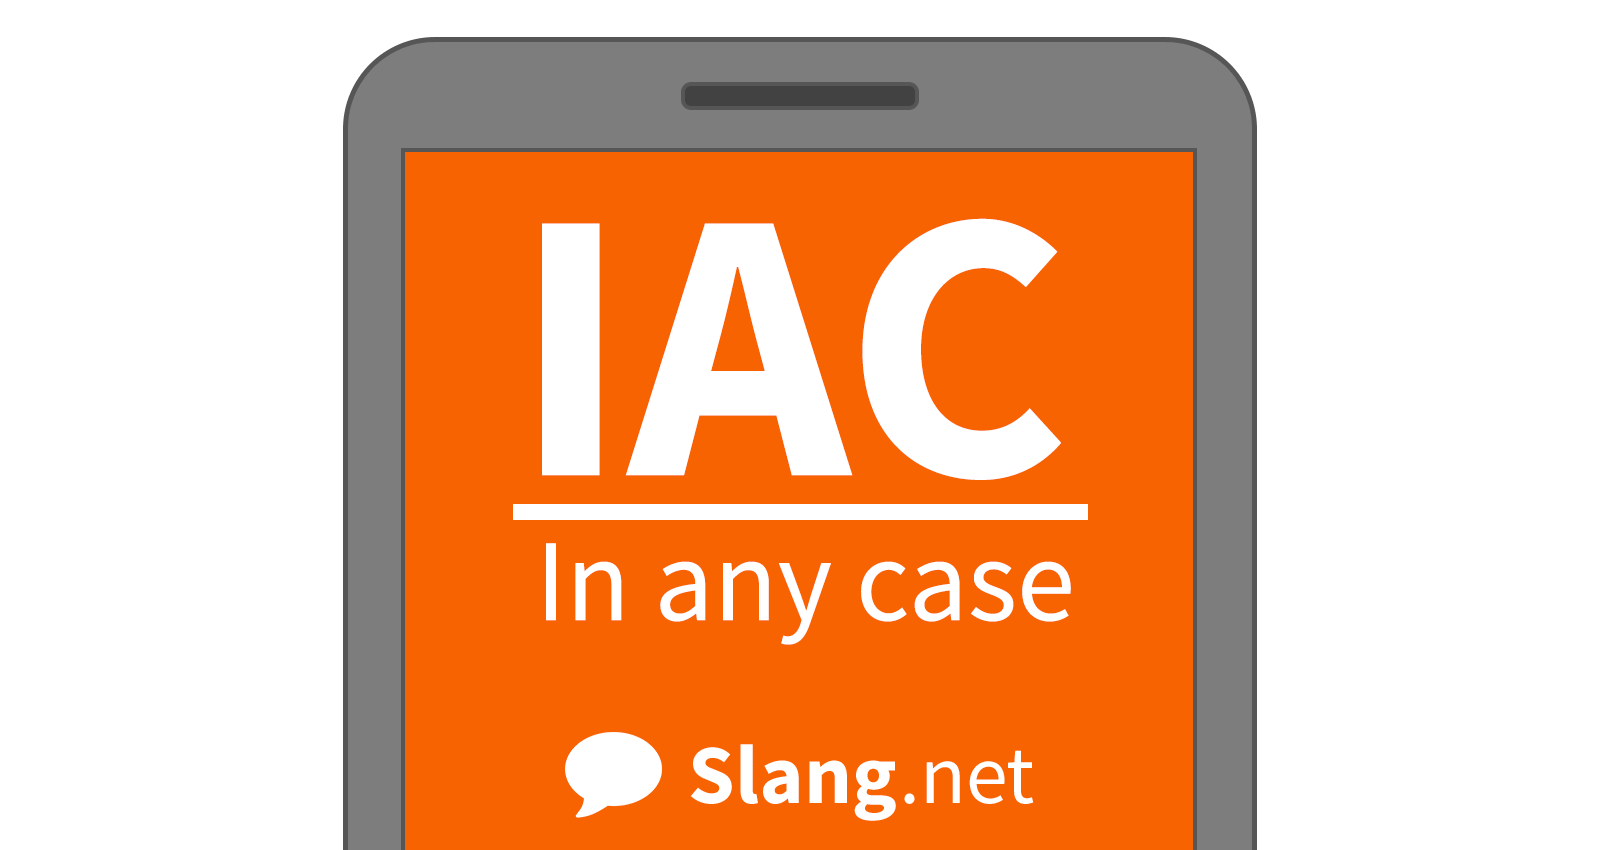 You will likely see IAC in texts and messages online